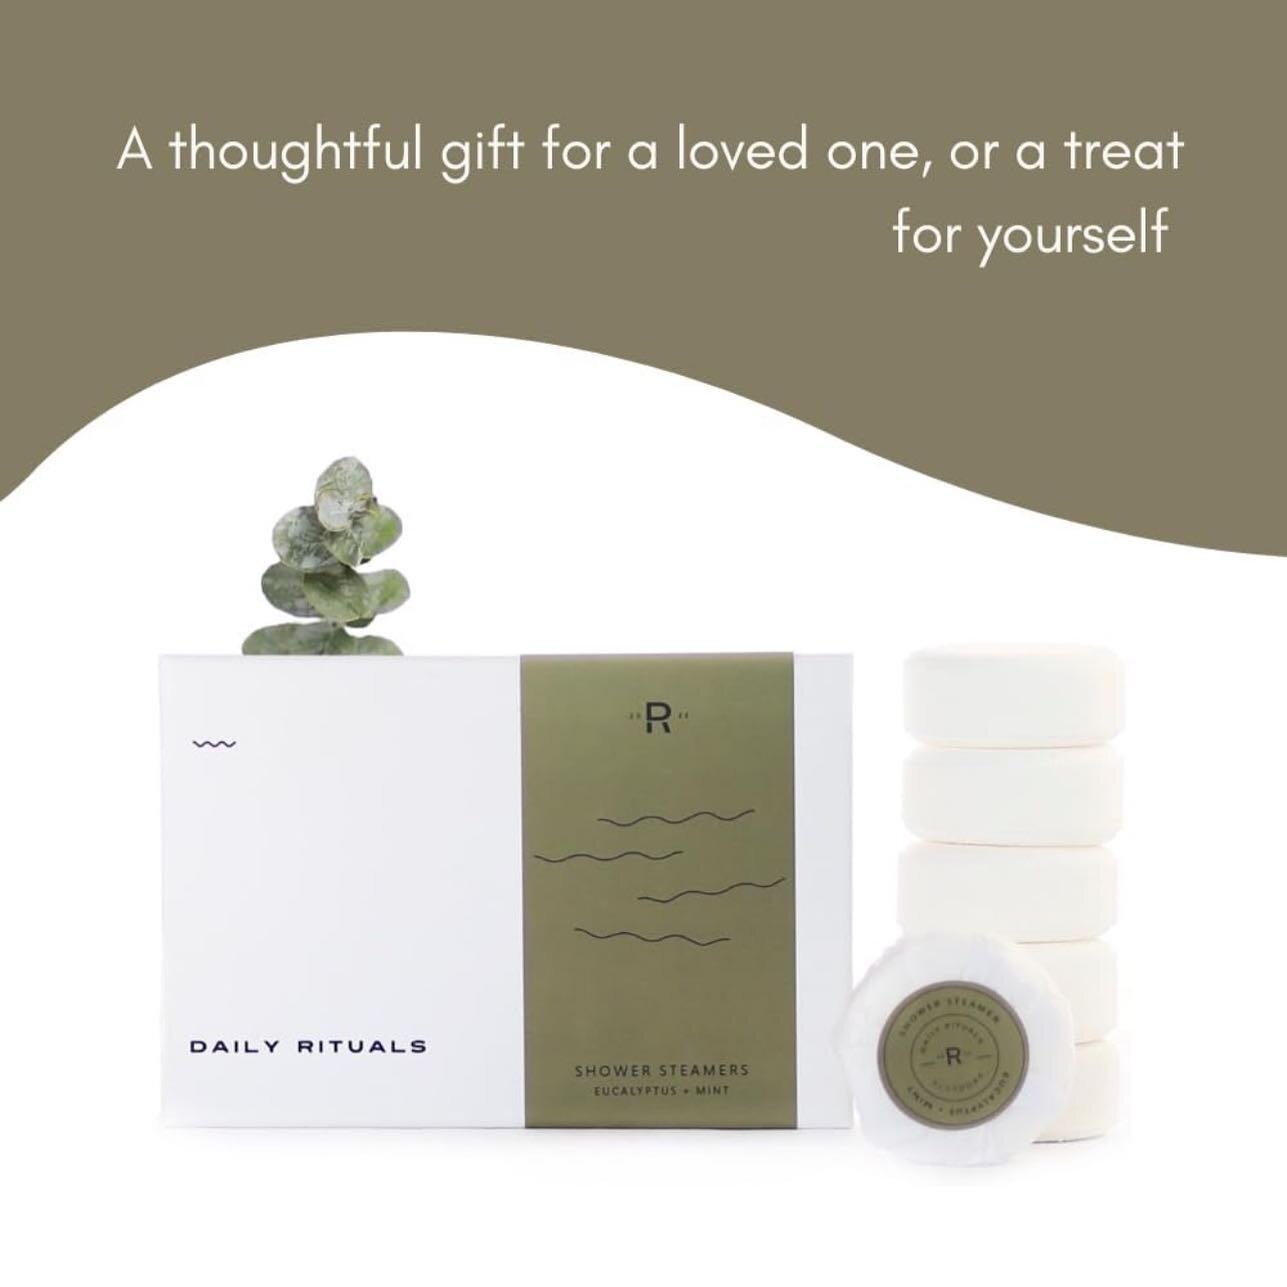 Our shopper reviews say it all &mdash; a perfect gift for a loved one, or a treat for yourself 😉🎁

〰️

#dailyroutine #wellnessjourney #personalgrowth #giftideas #gitfidea #selfcaretips #dailyrituals